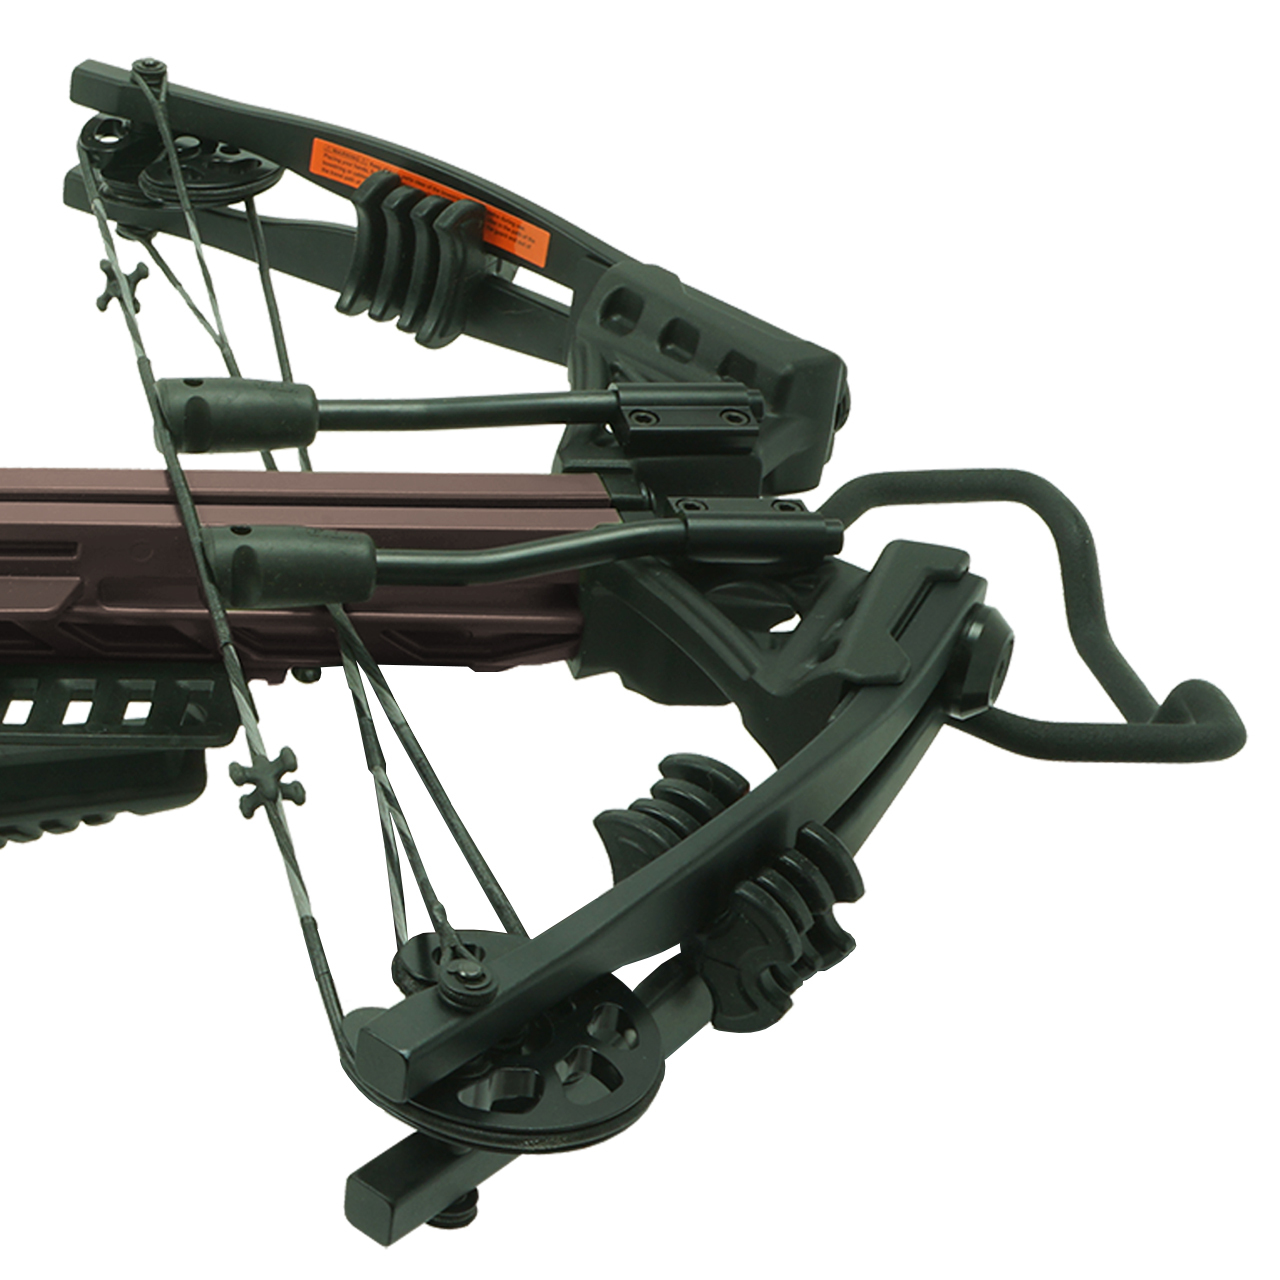 Rocky Mountain 415 Crossbow with Crank. Dark Earth Color. - image 2 of 5